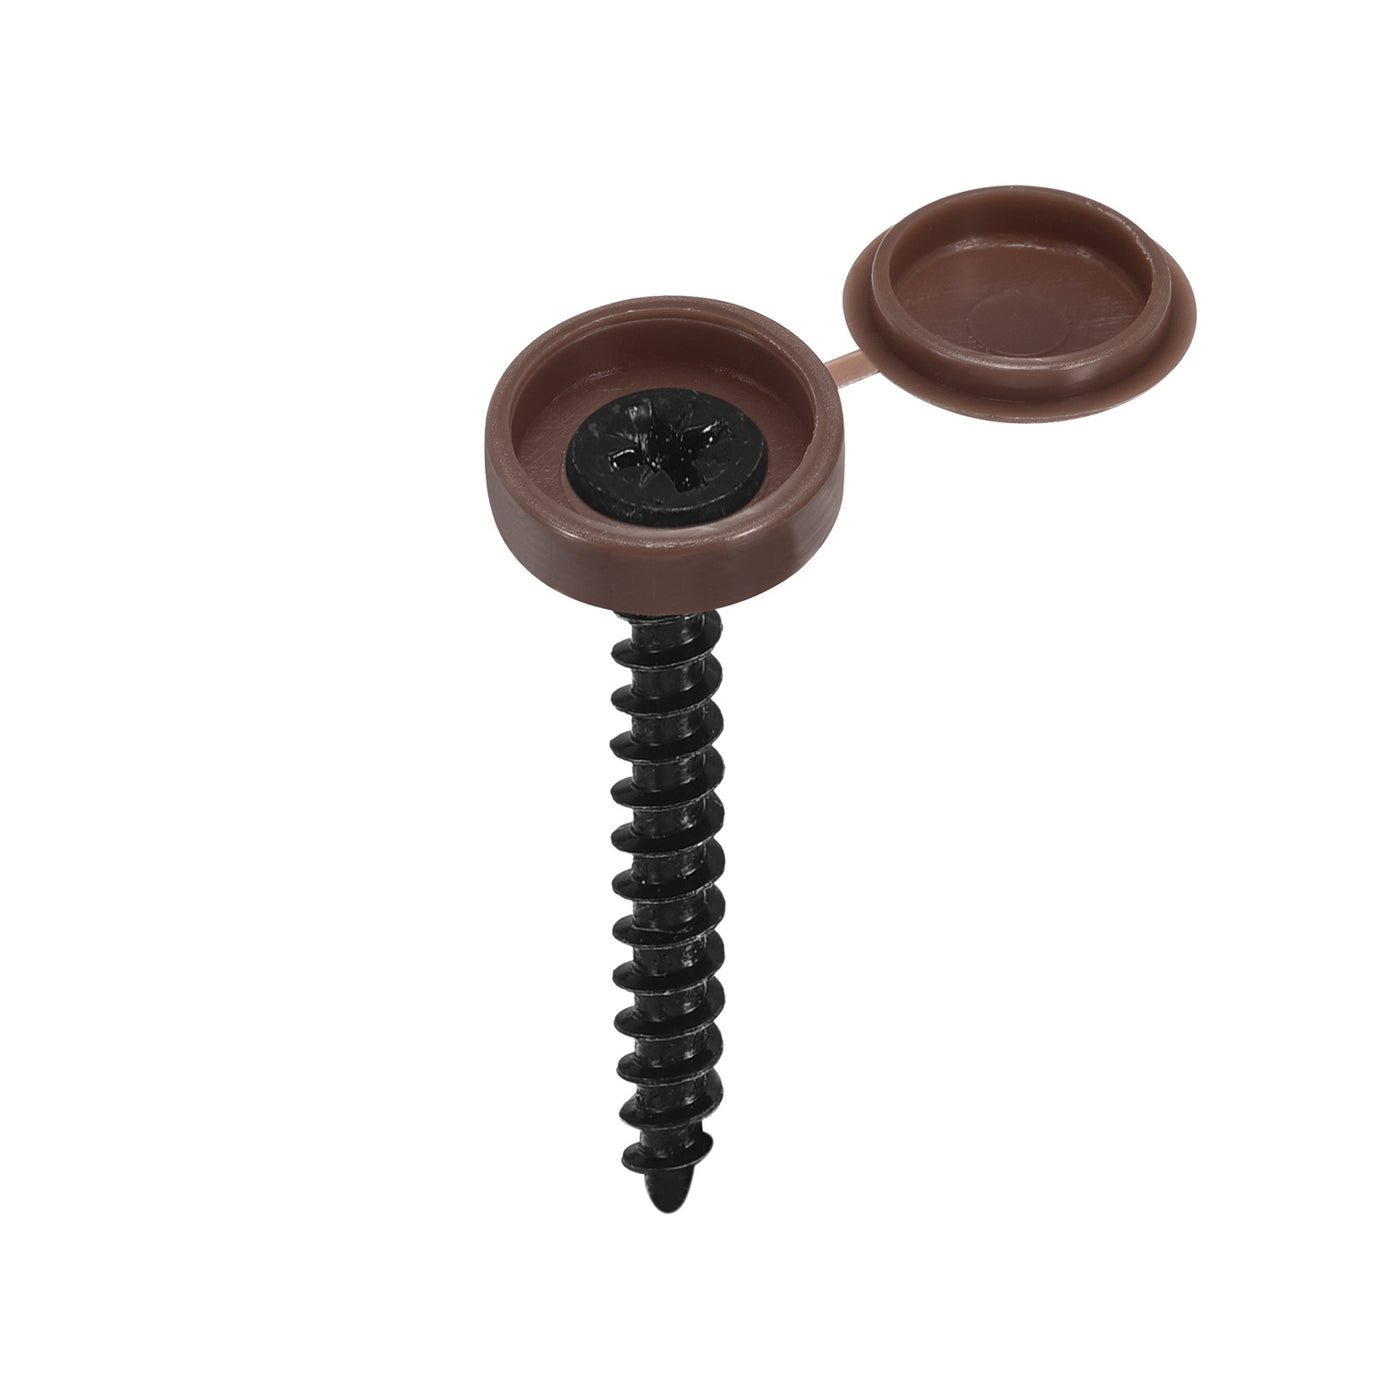 uxcell Uxcell 200Pcs 5mm Hinged Screw Cover Caps Plastic Fold Screw Snap Covers, Dark Brown